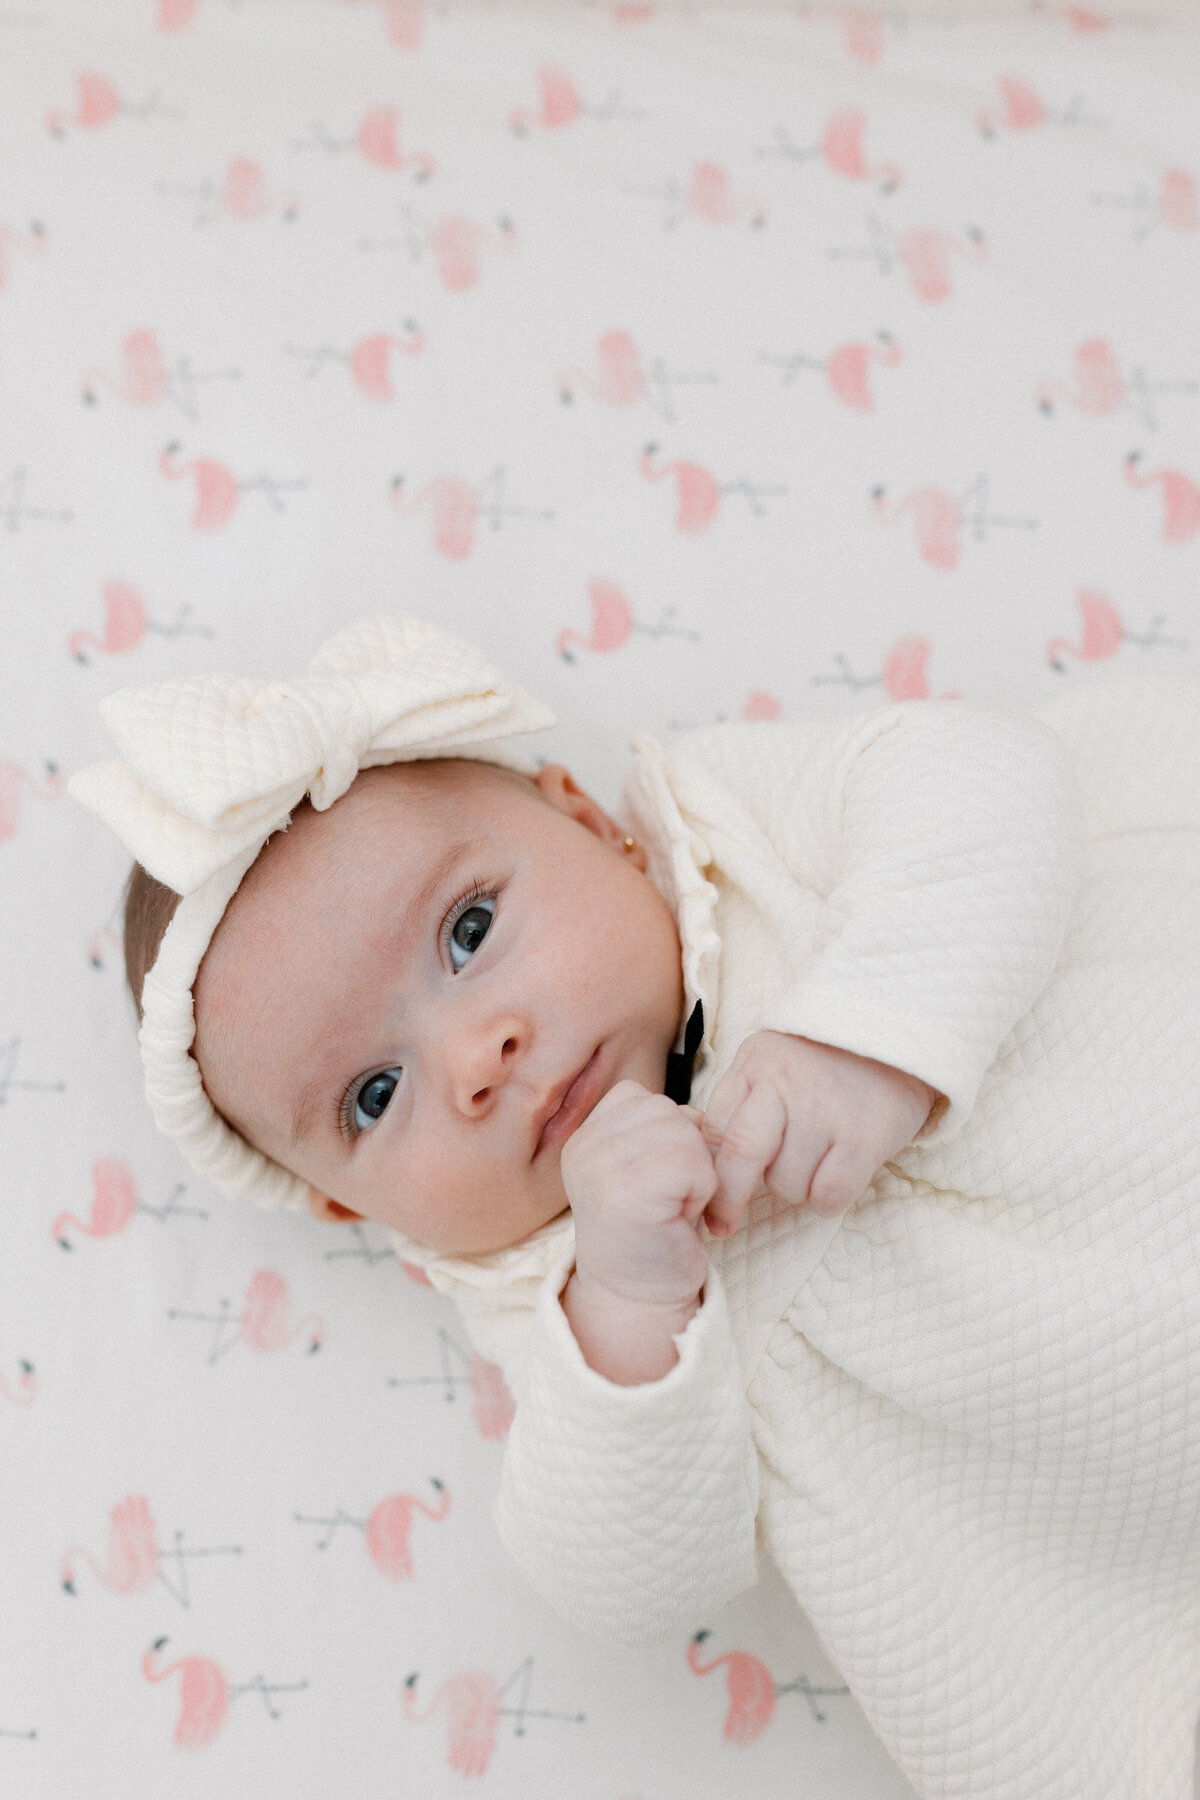 Lifestyle Newborn Photography session in South Florida, Maria Cordova Photography